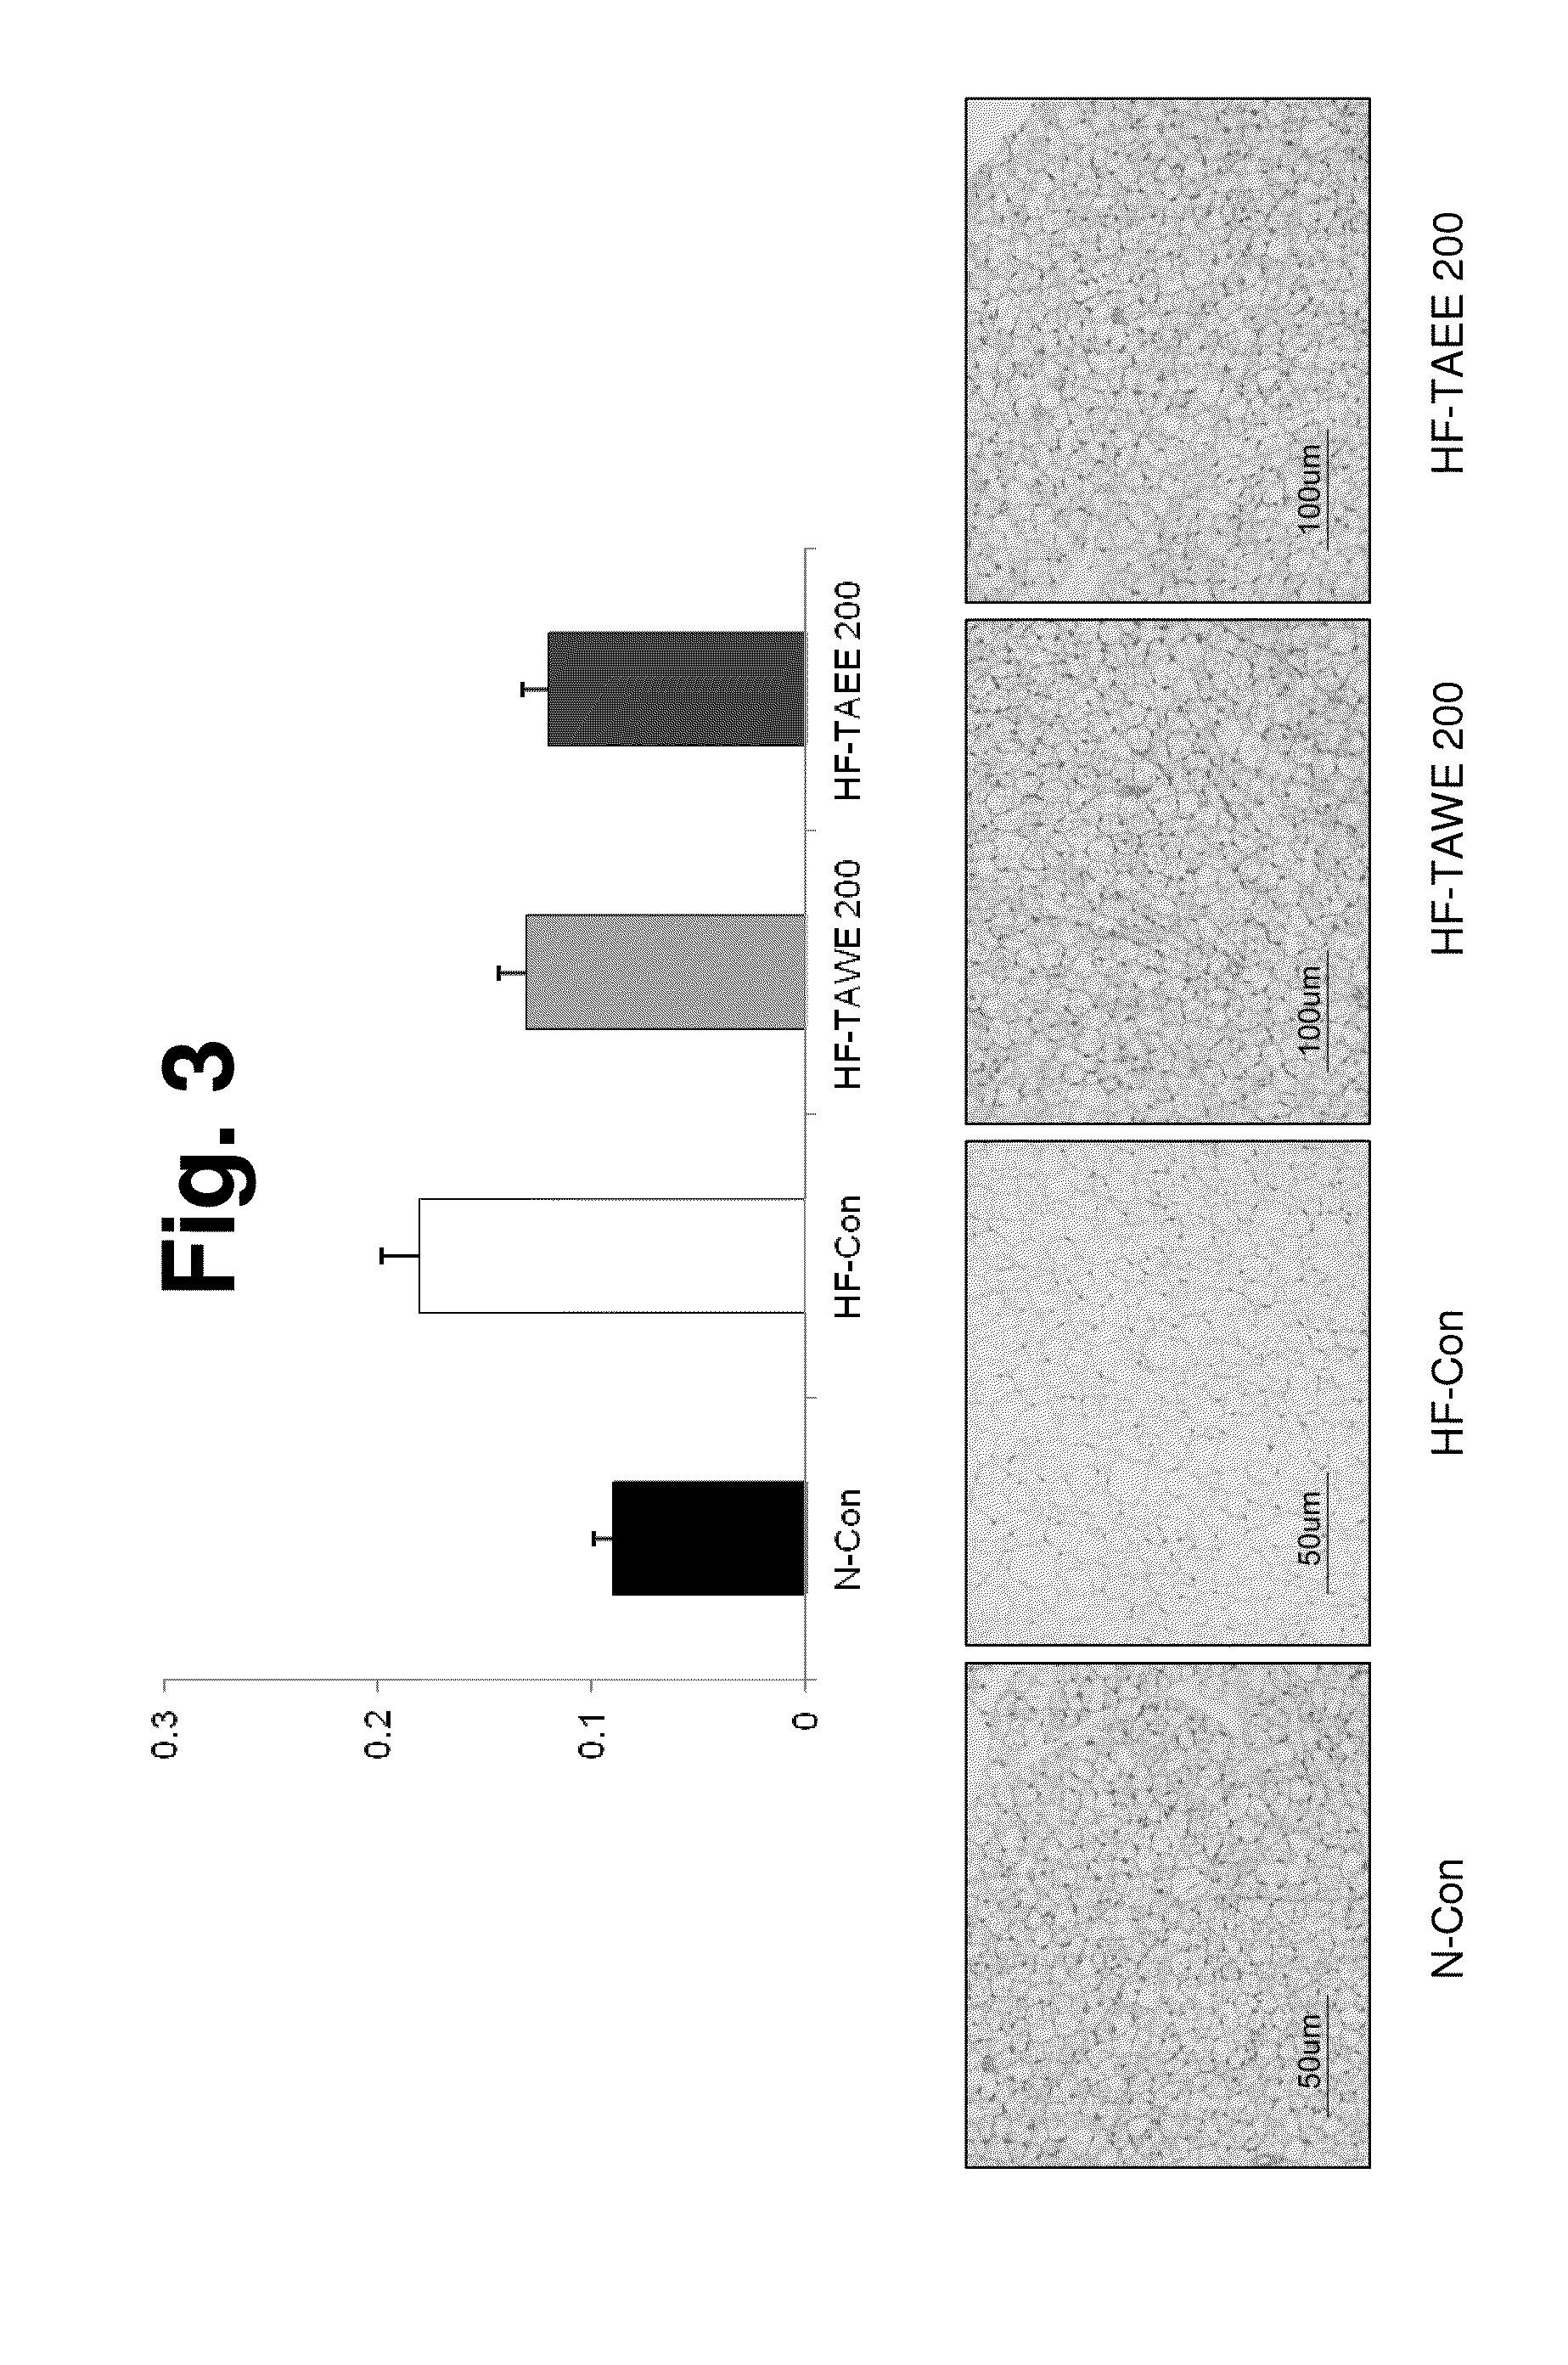 Composition for treating and preventing obesity, containing wheatgrass extract as active ingredient